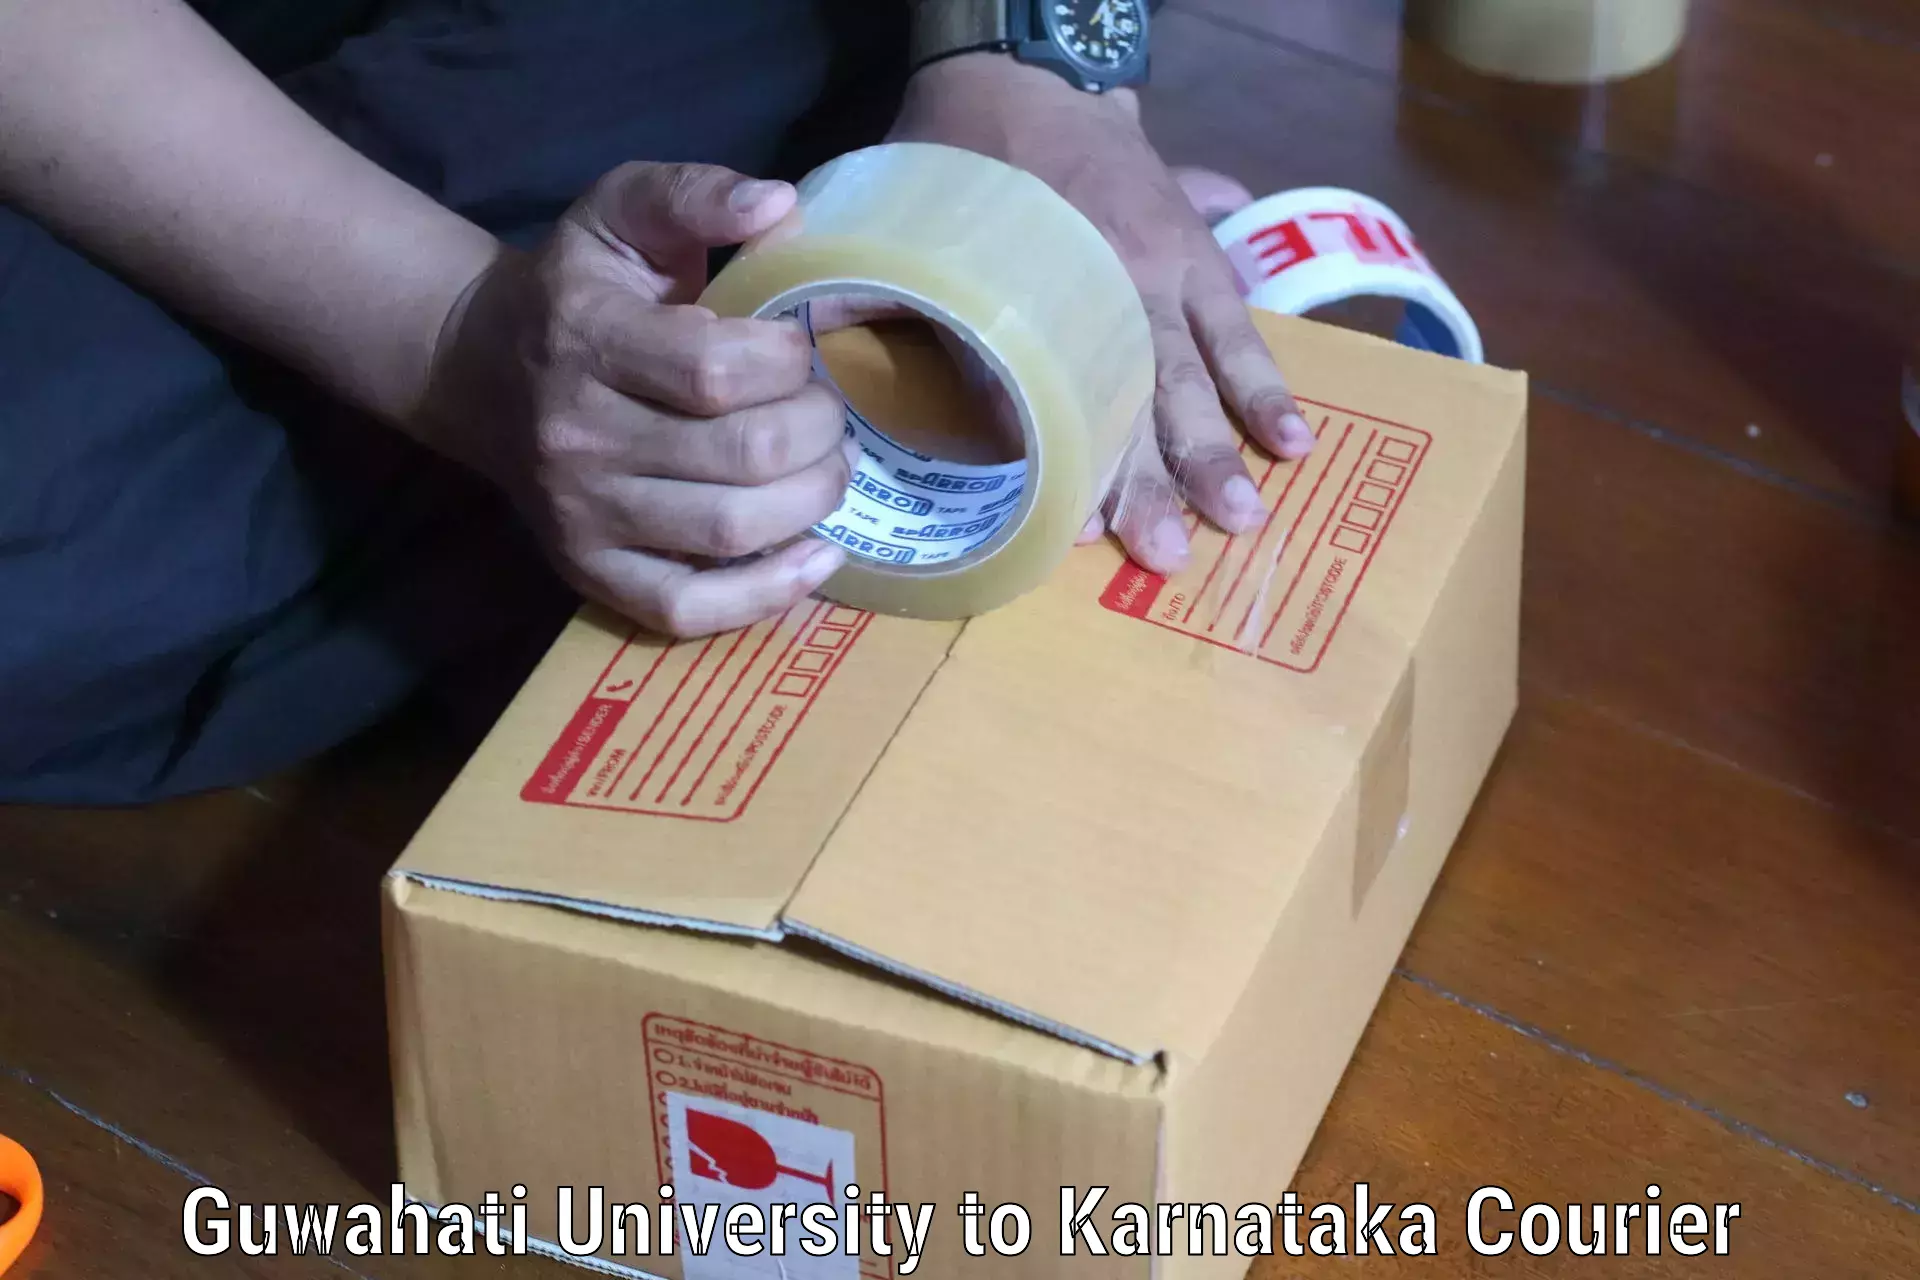 Quick courier services in Guwahati University to Talikoti